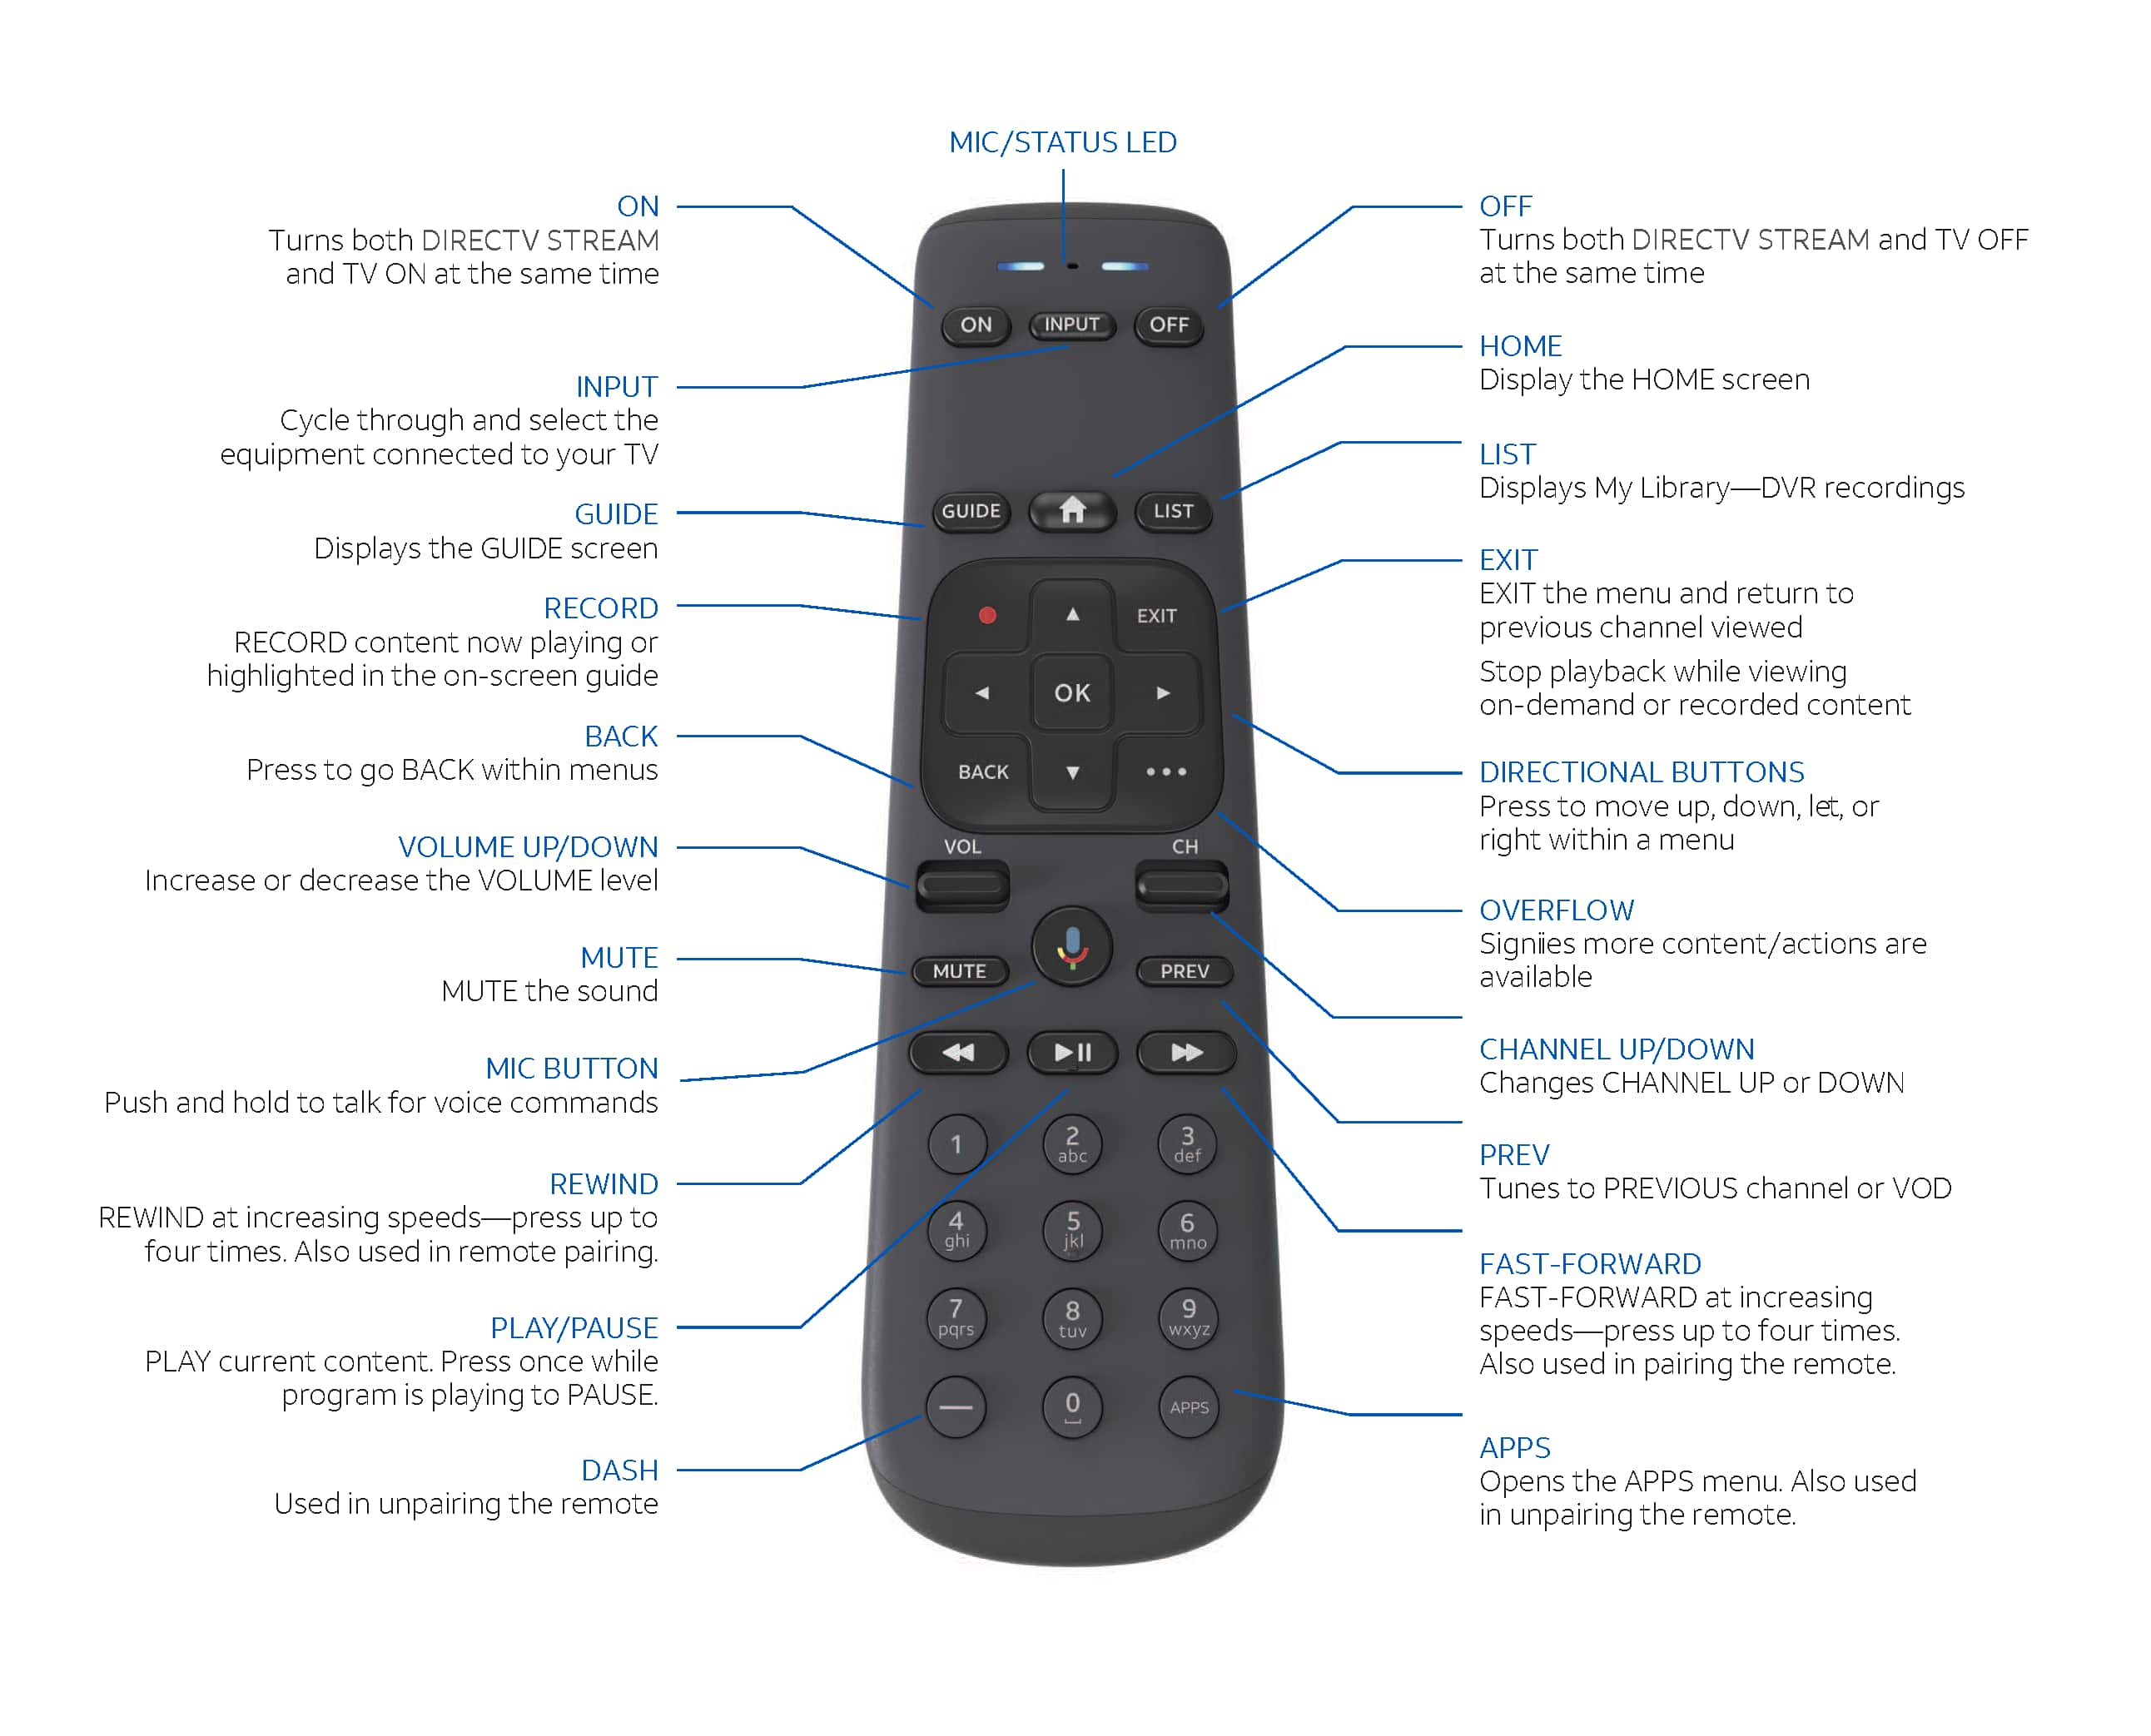 how to program urc remote to leave tv on after changing